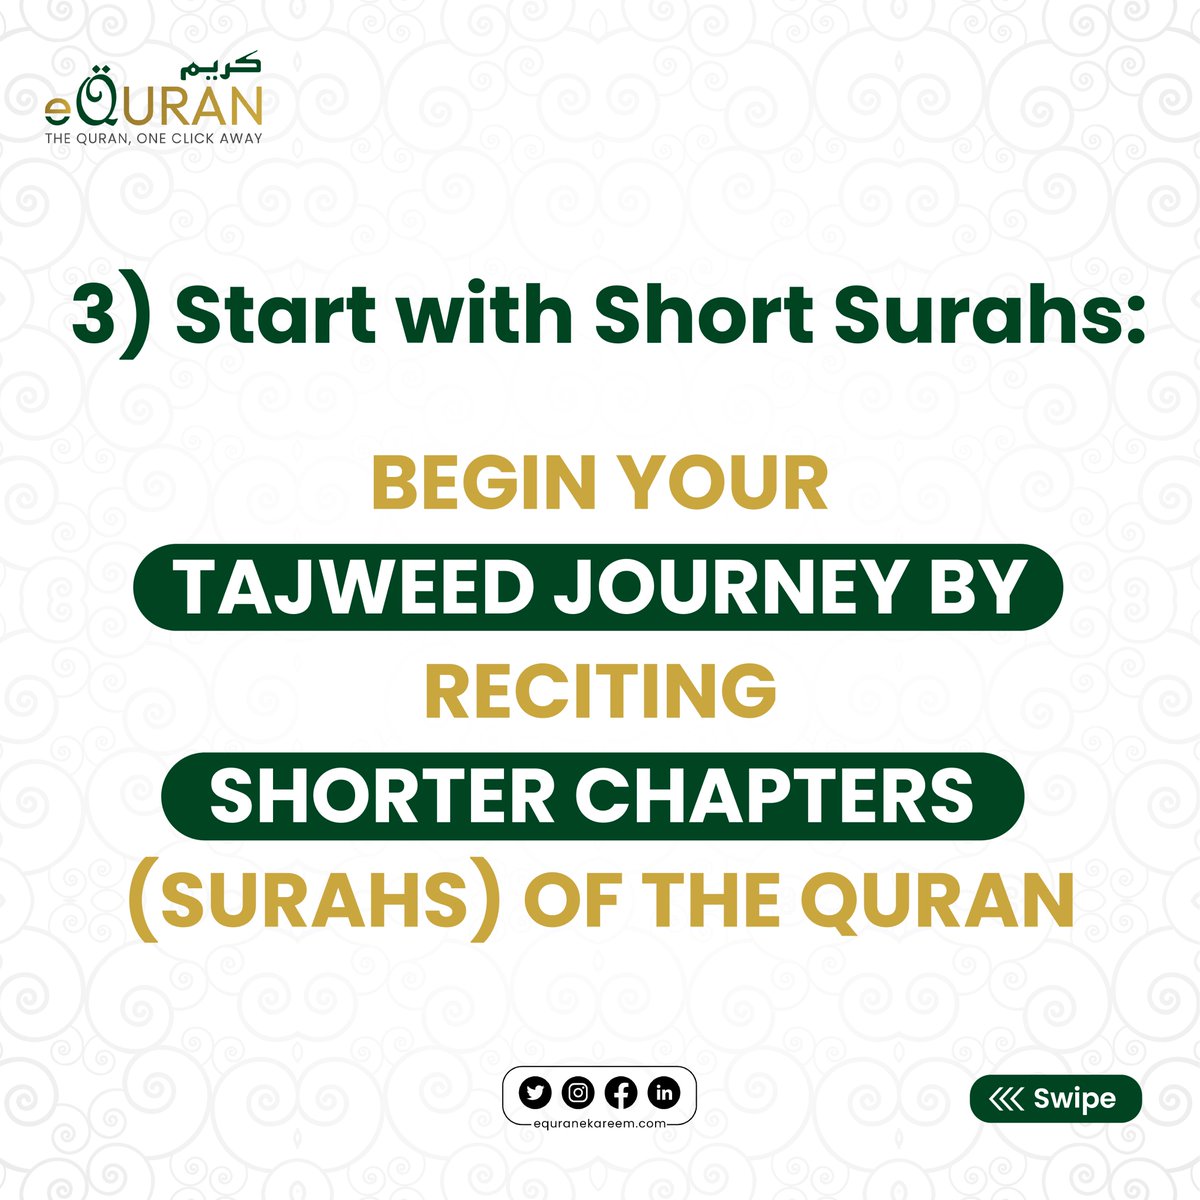 Learn The Most Important and mandatory Part of Quran-e-Majeed (Tajweed) In 5 easy steps With eQuranekareem, share it with your friends and family 

Register For Online Quran Courses at
+92313 9613696

#qurantajweed #Tajweed #tajweedrules #learntajweed #eQuranekareem $URF #mafsnl